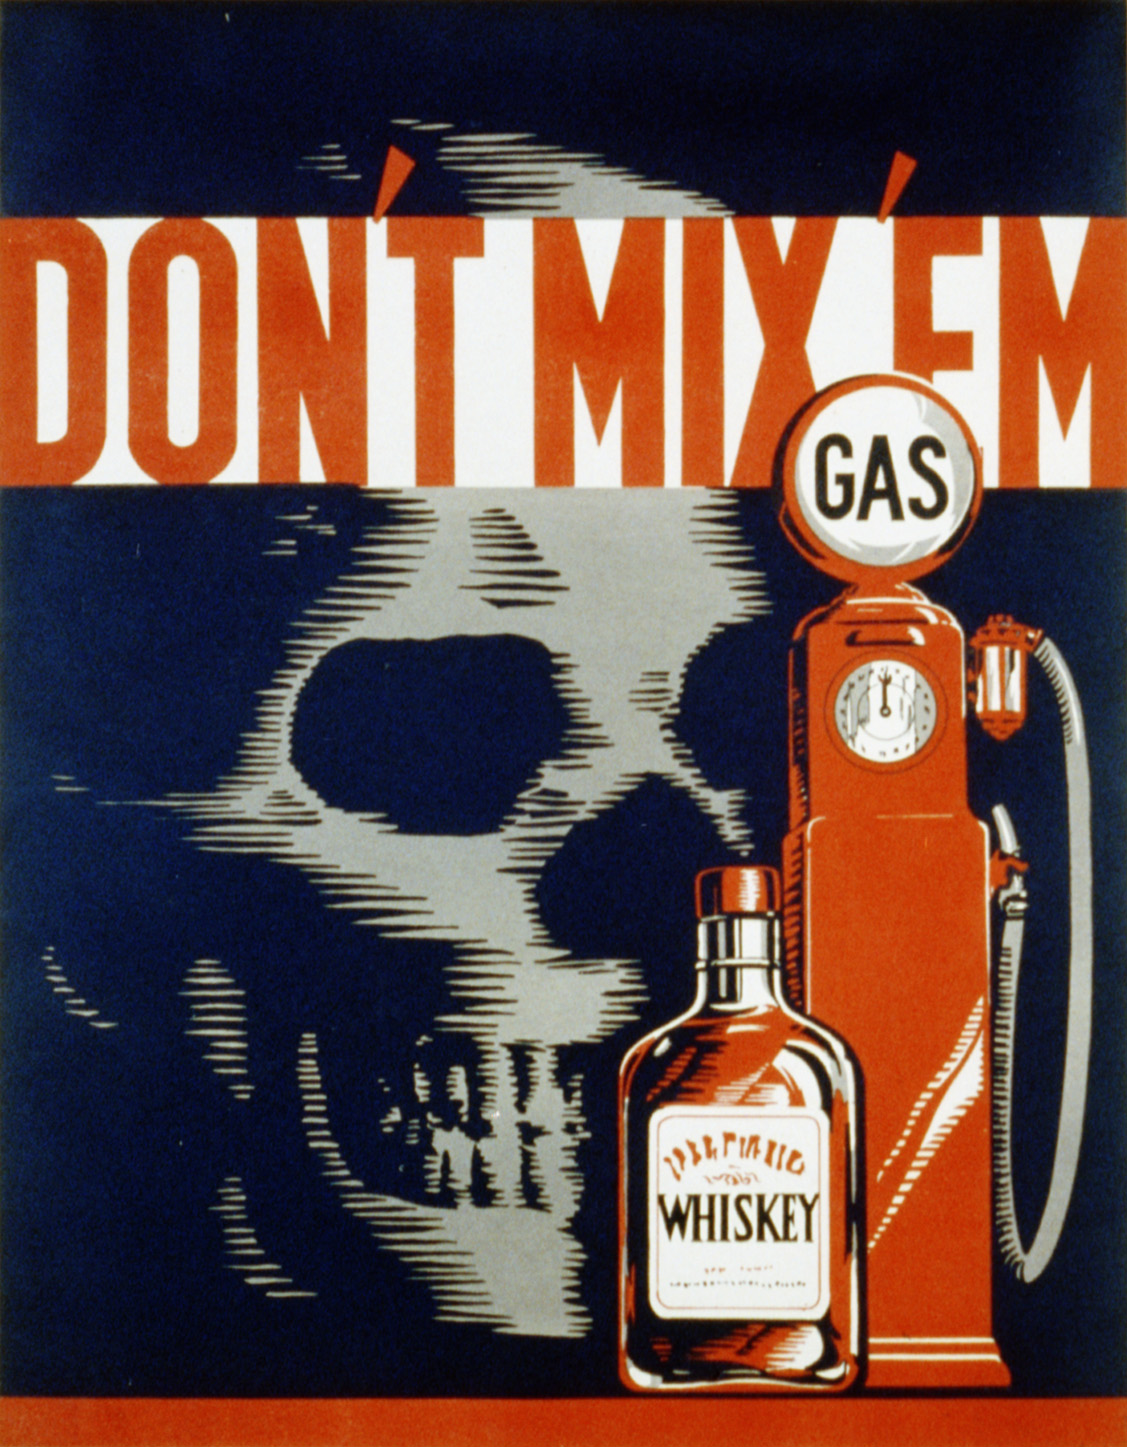 1930's poster showing a skull and the words "Don't Mix Em". Also depicted are a whisky bottle and an automotive gas pump. dangerous drinks